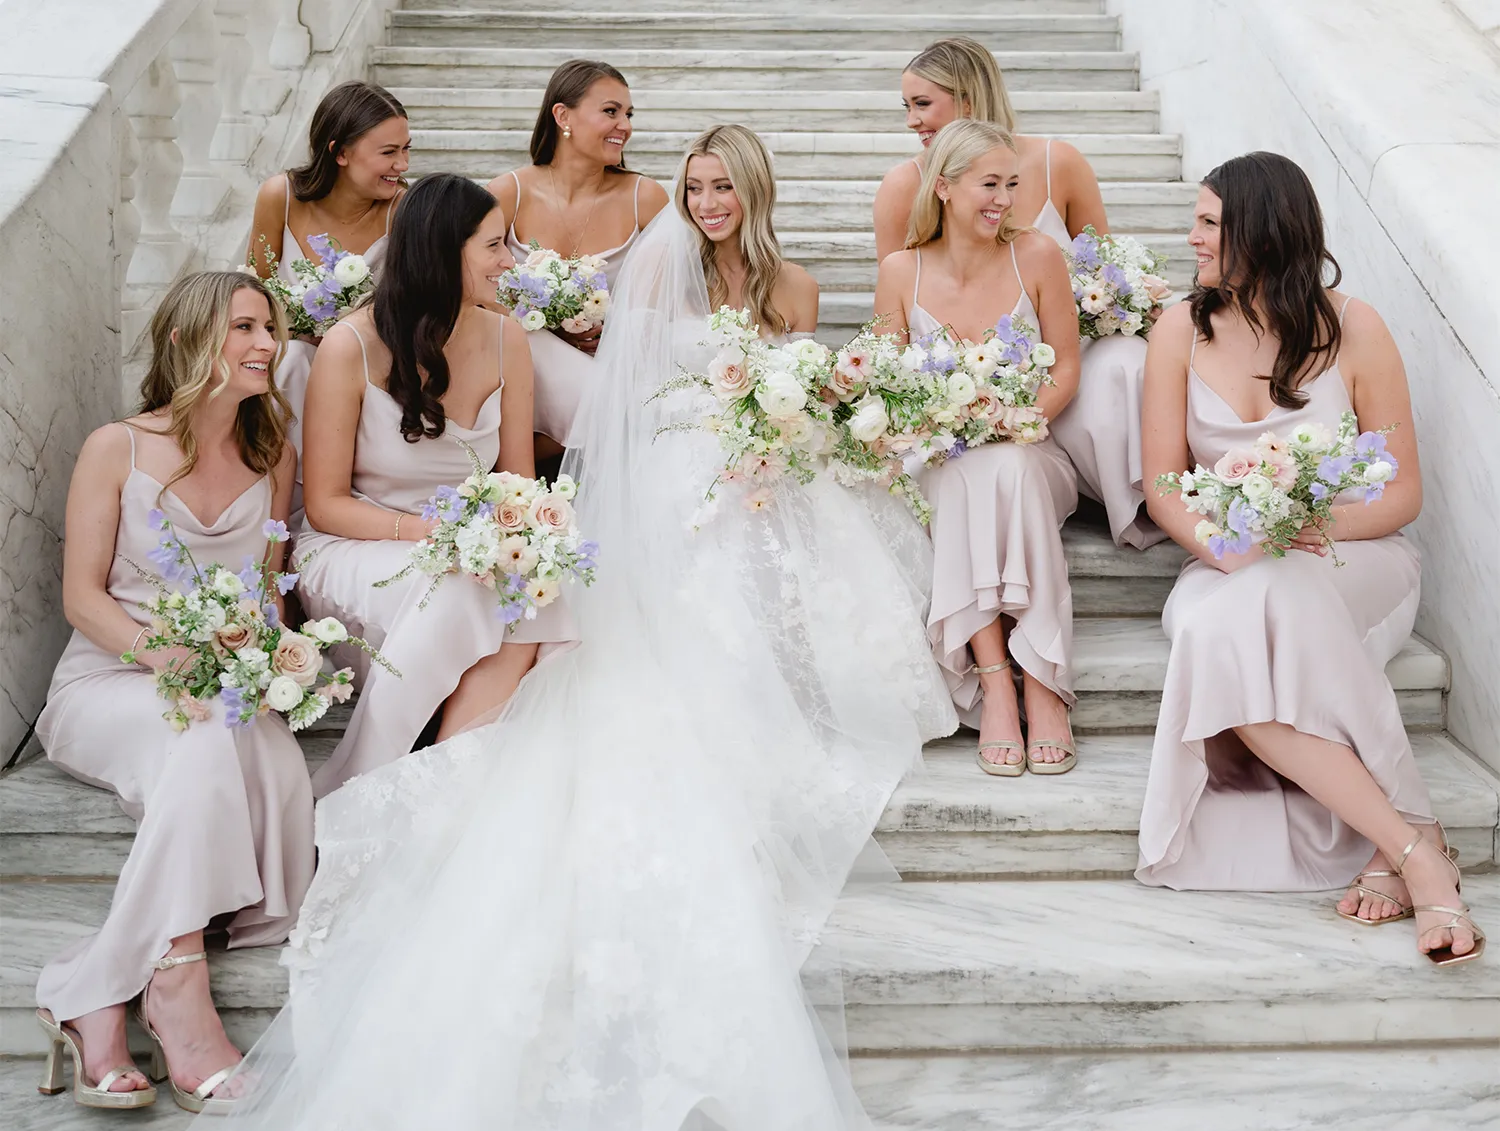 Allison sitting with her bridesmaids on marble steps